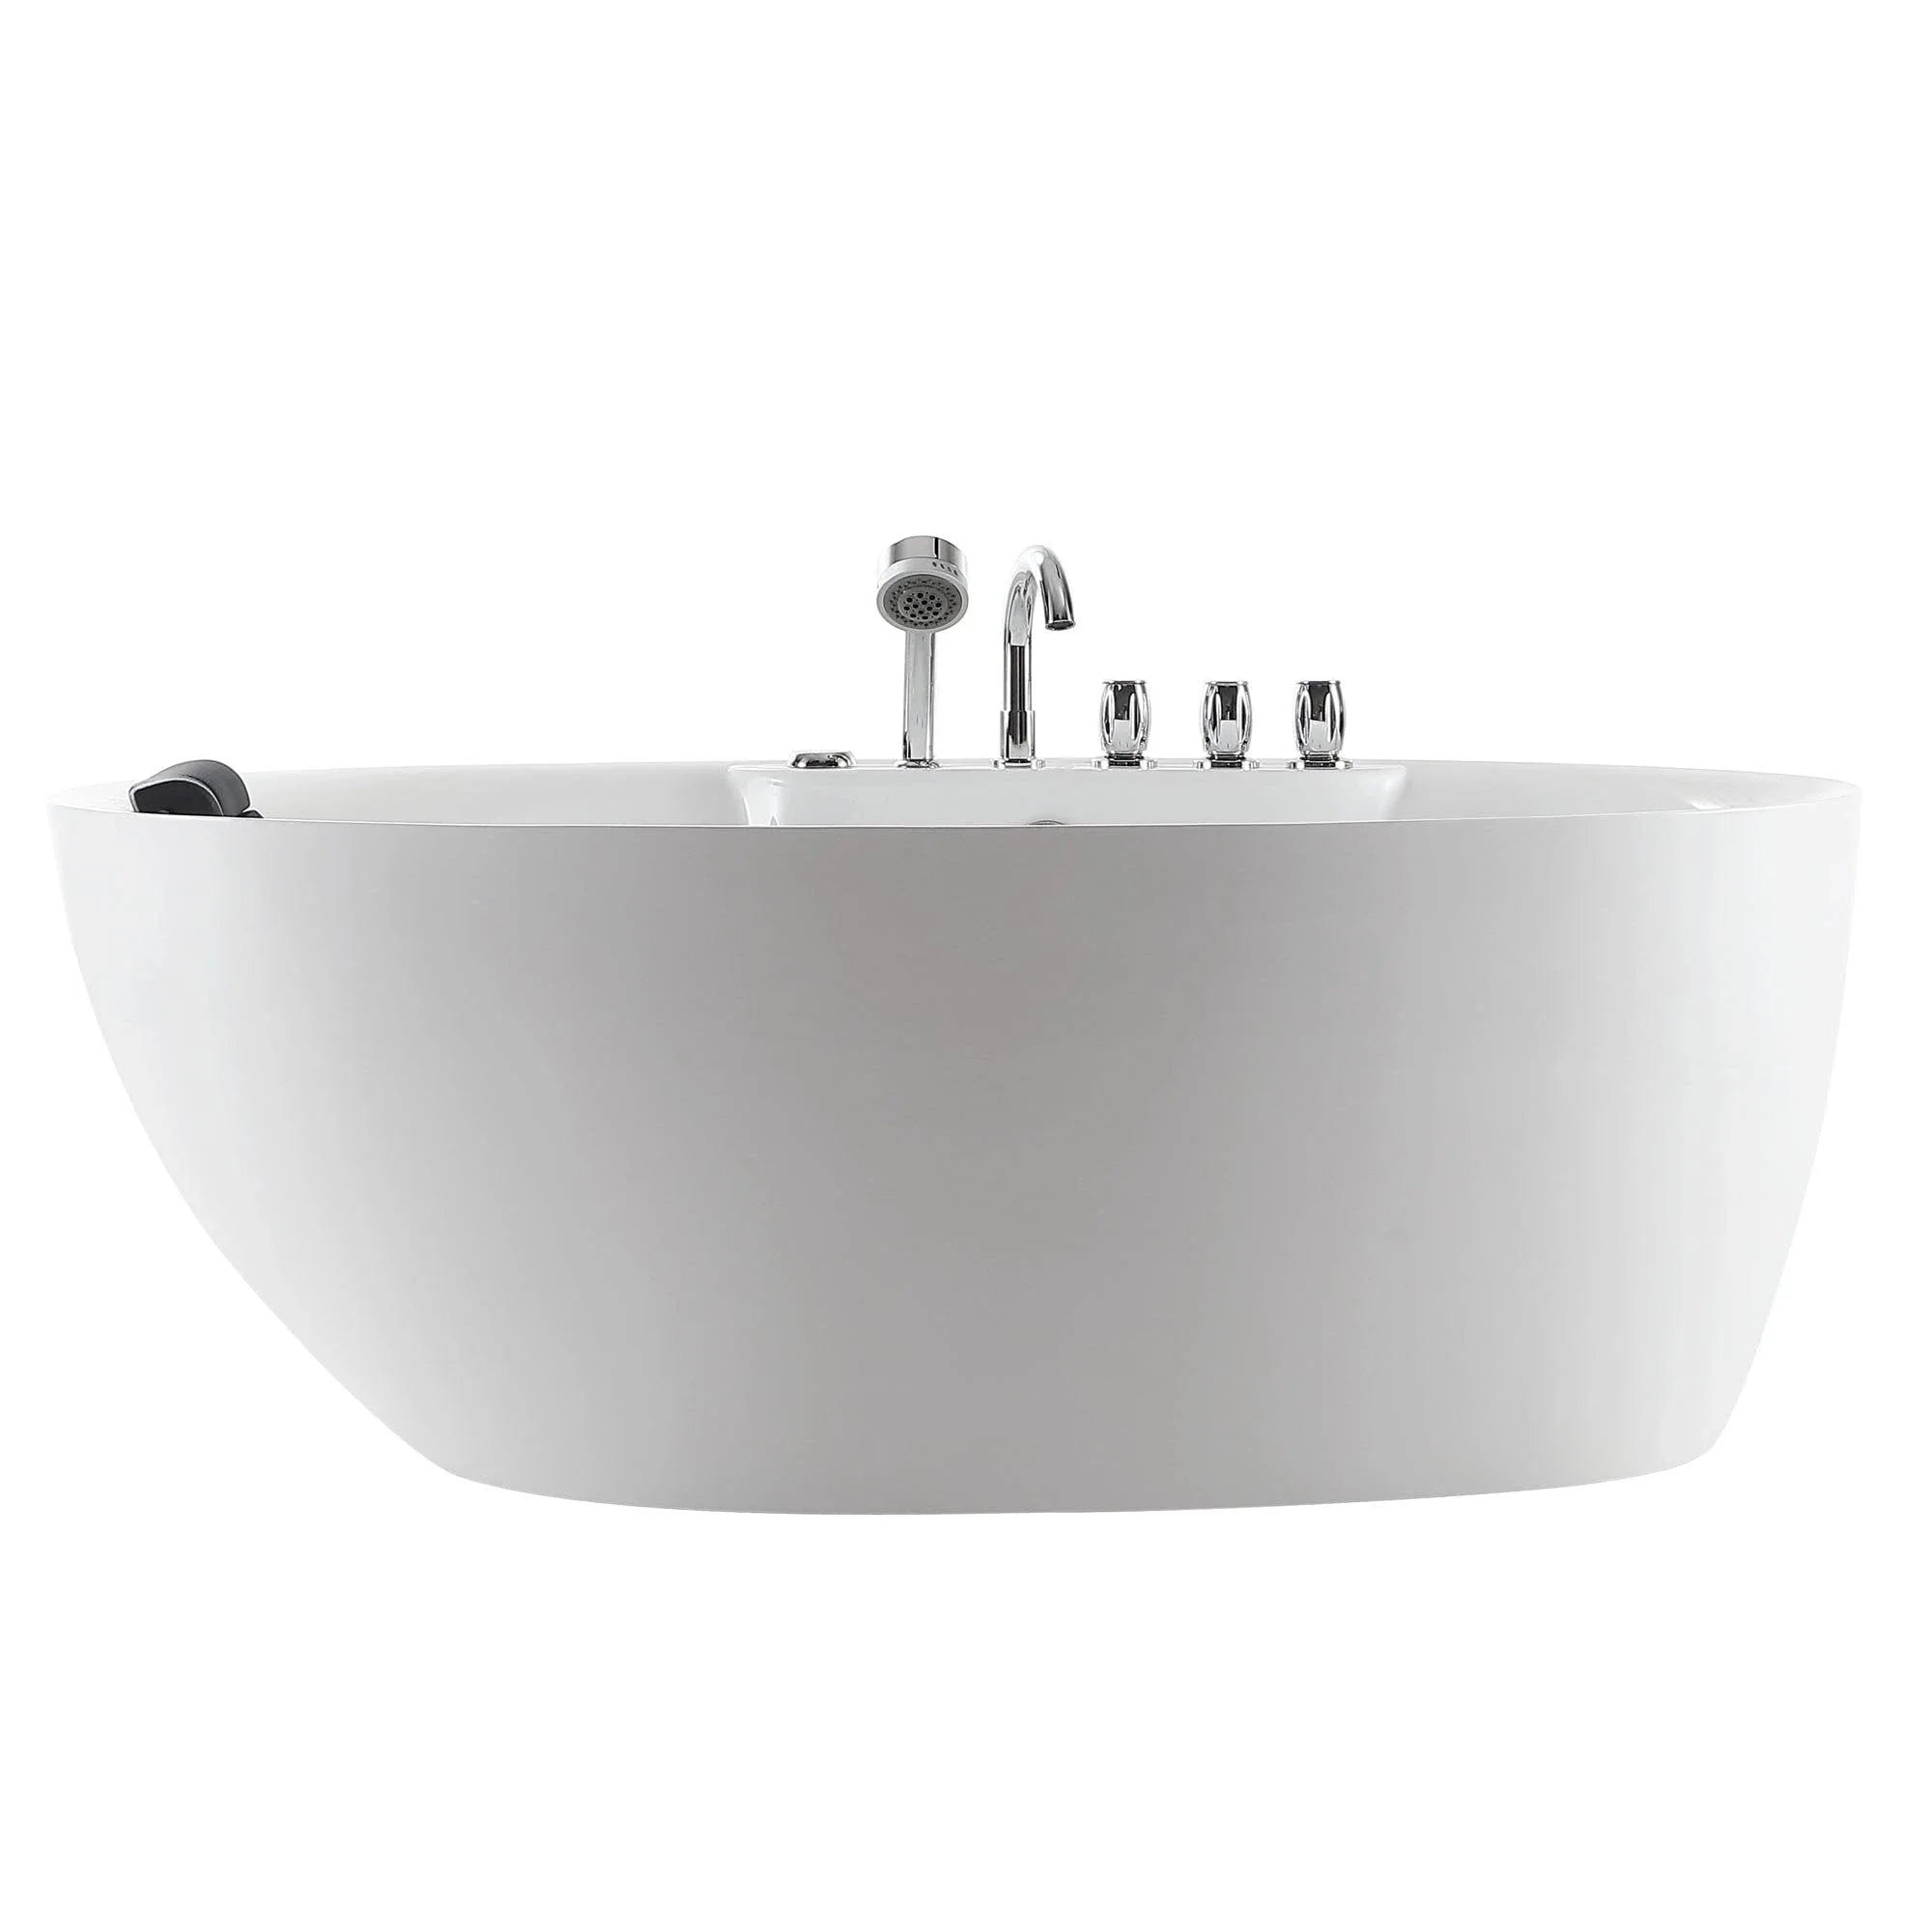 Empava 67 in. Freestanding Jetted Bathtub in White Acrylic (67AIS13)